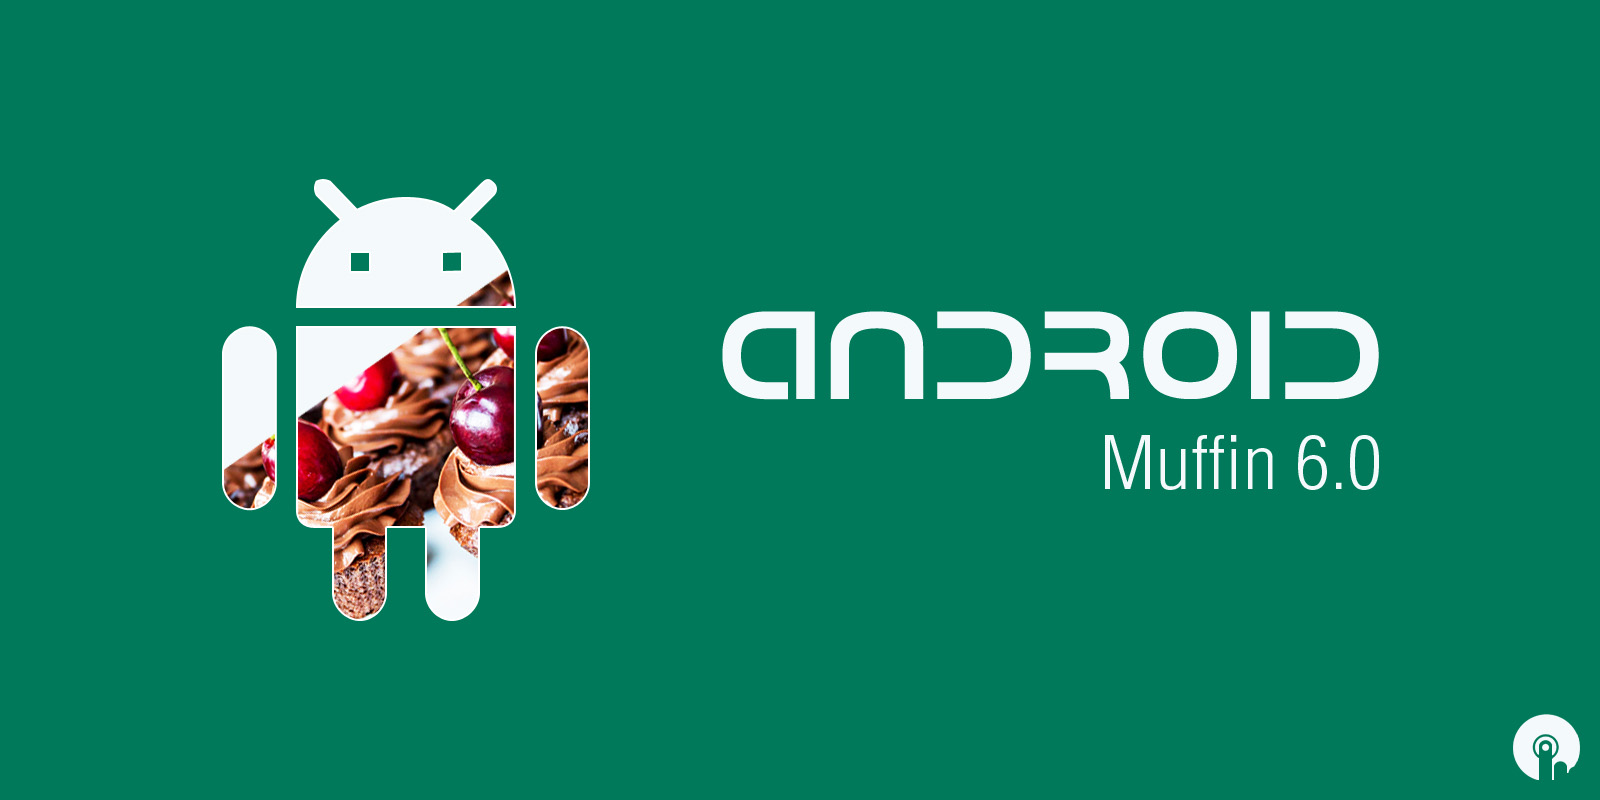 Android Muffin 6 image